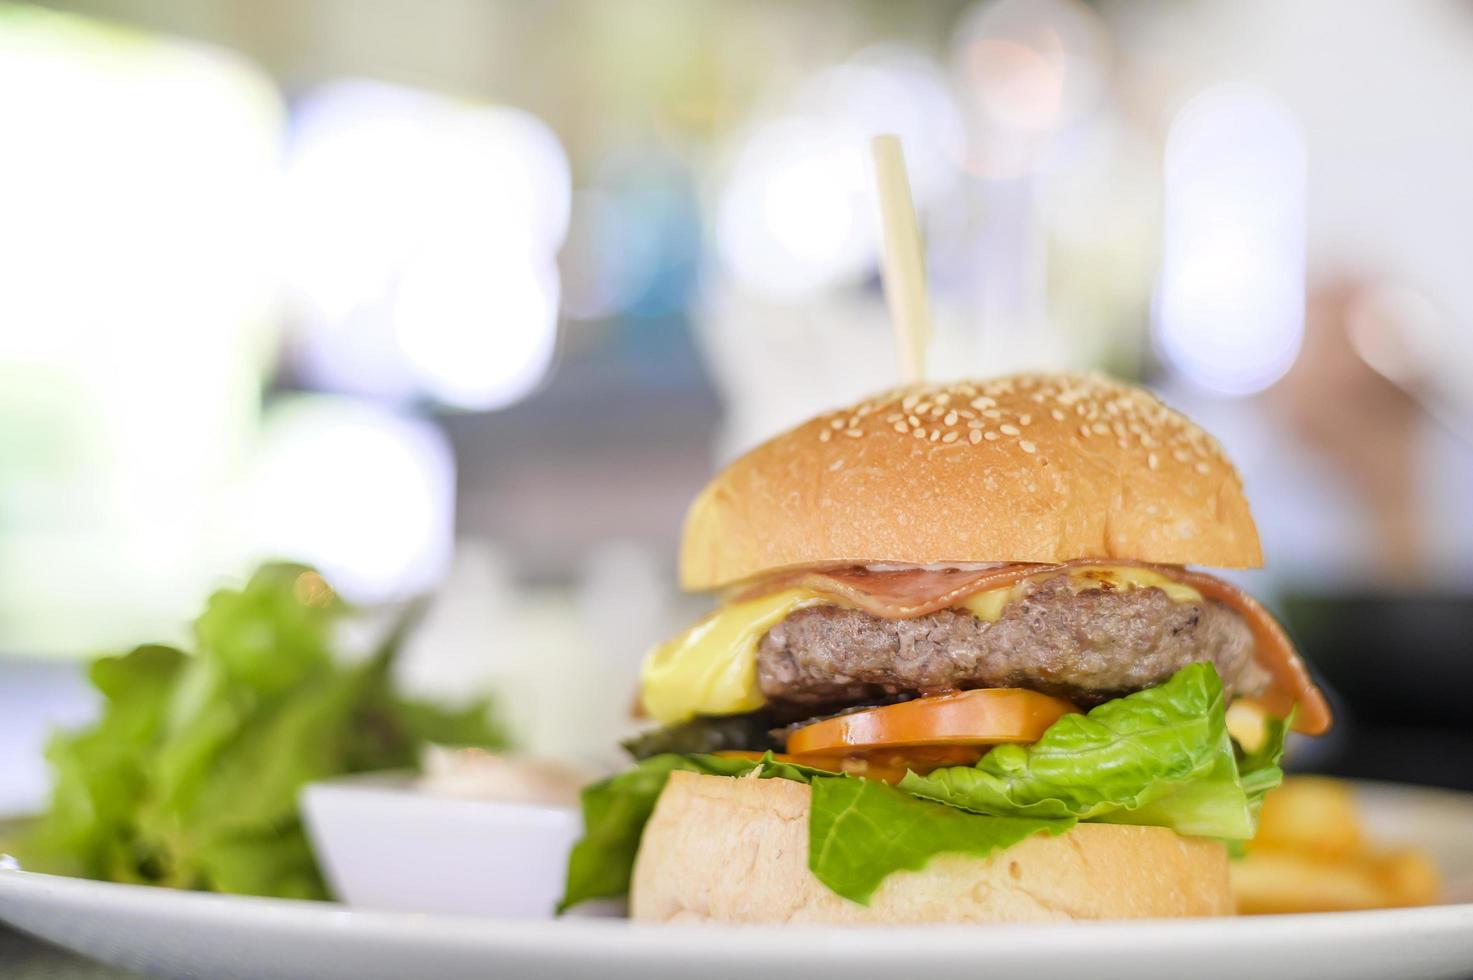 Large of tasty burger with beef, tomato, cheese and lettuce served in a plate photo